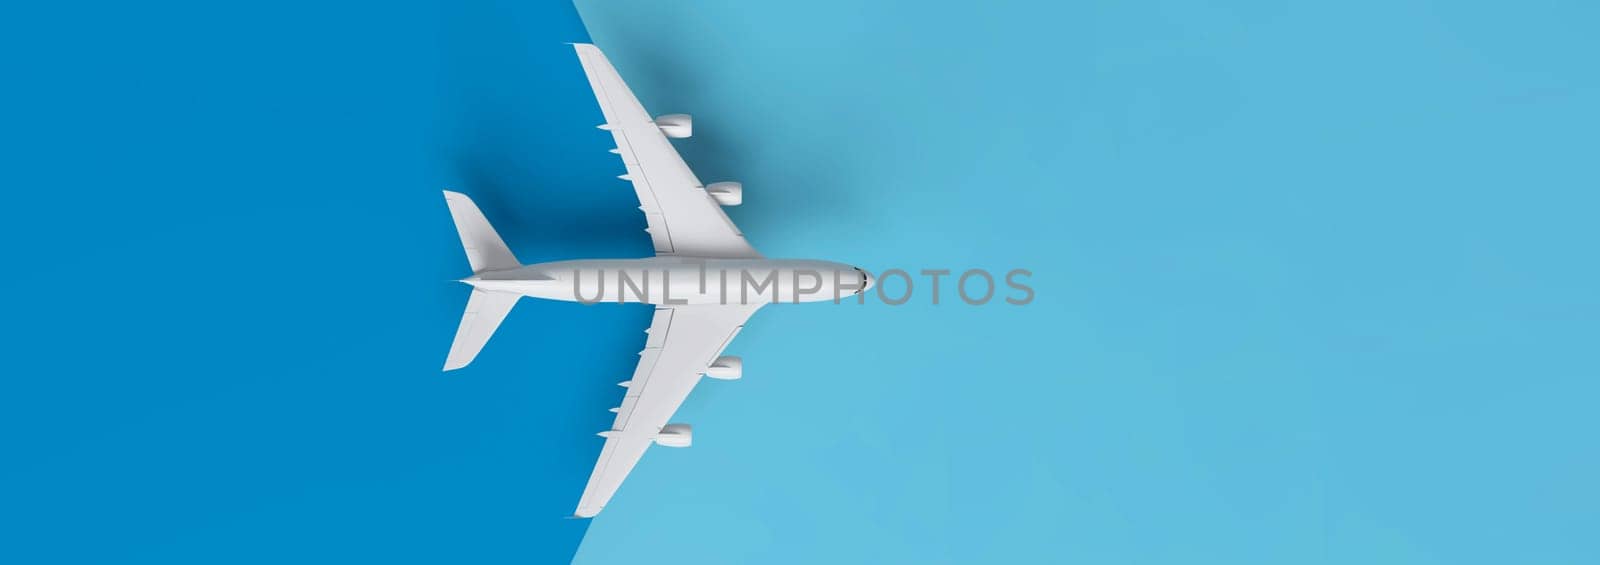 Travel concept with plane on blue background with copy space. 3D rendering.